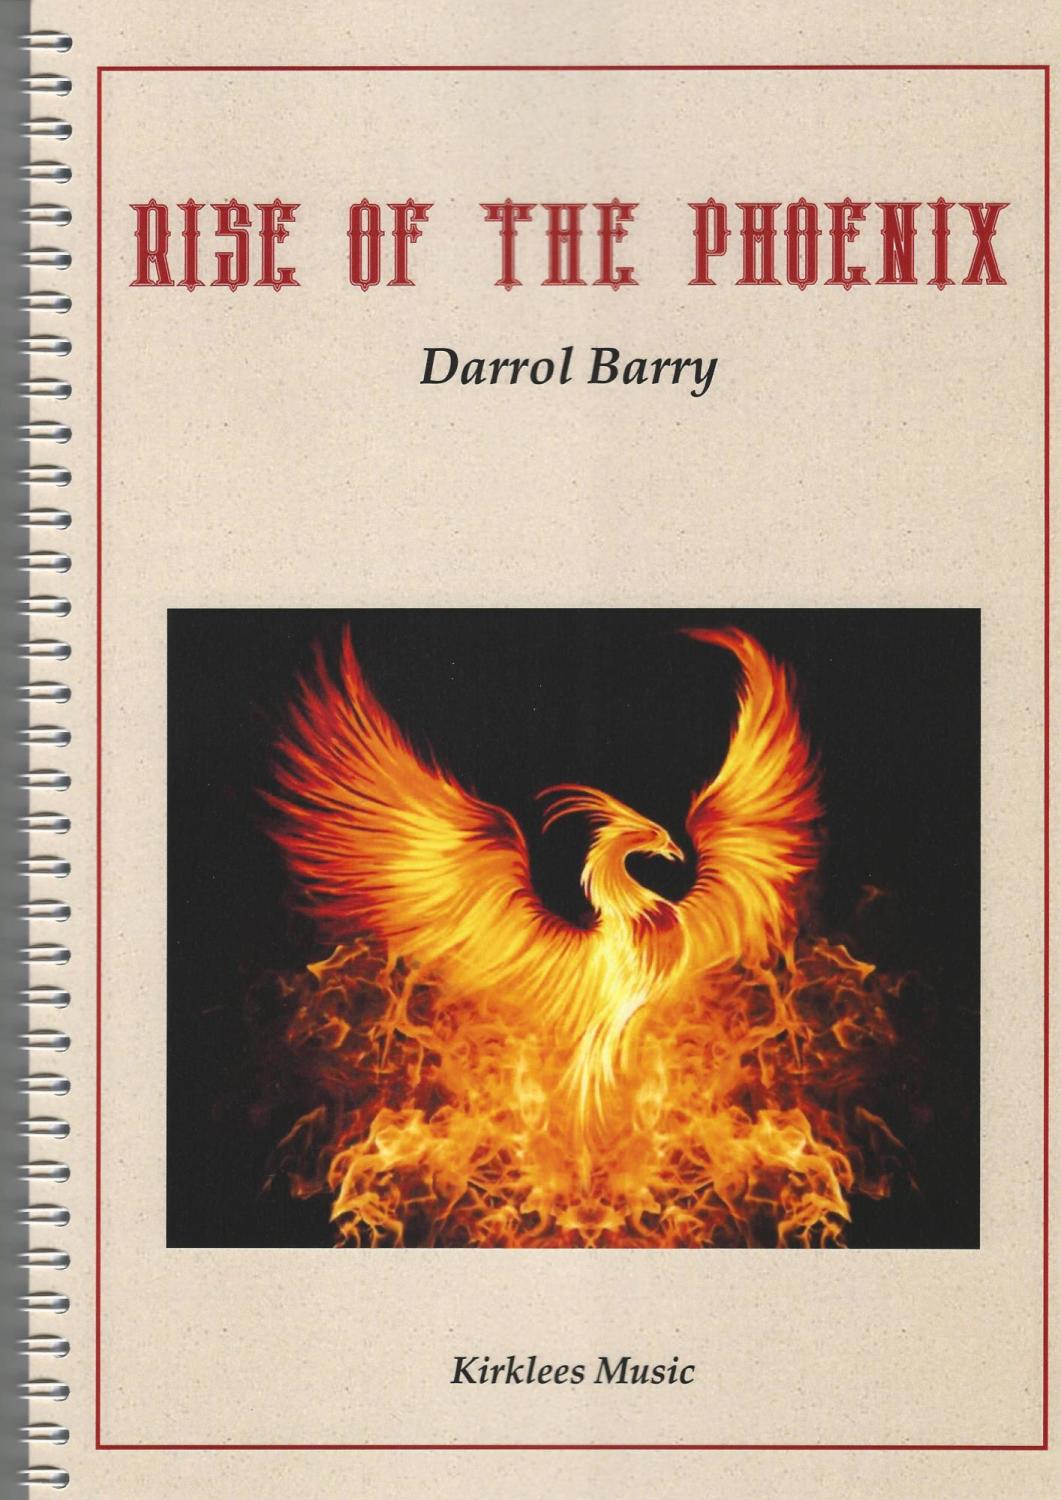 Rise of the Phoenix for Brass Band - Darrol Barry